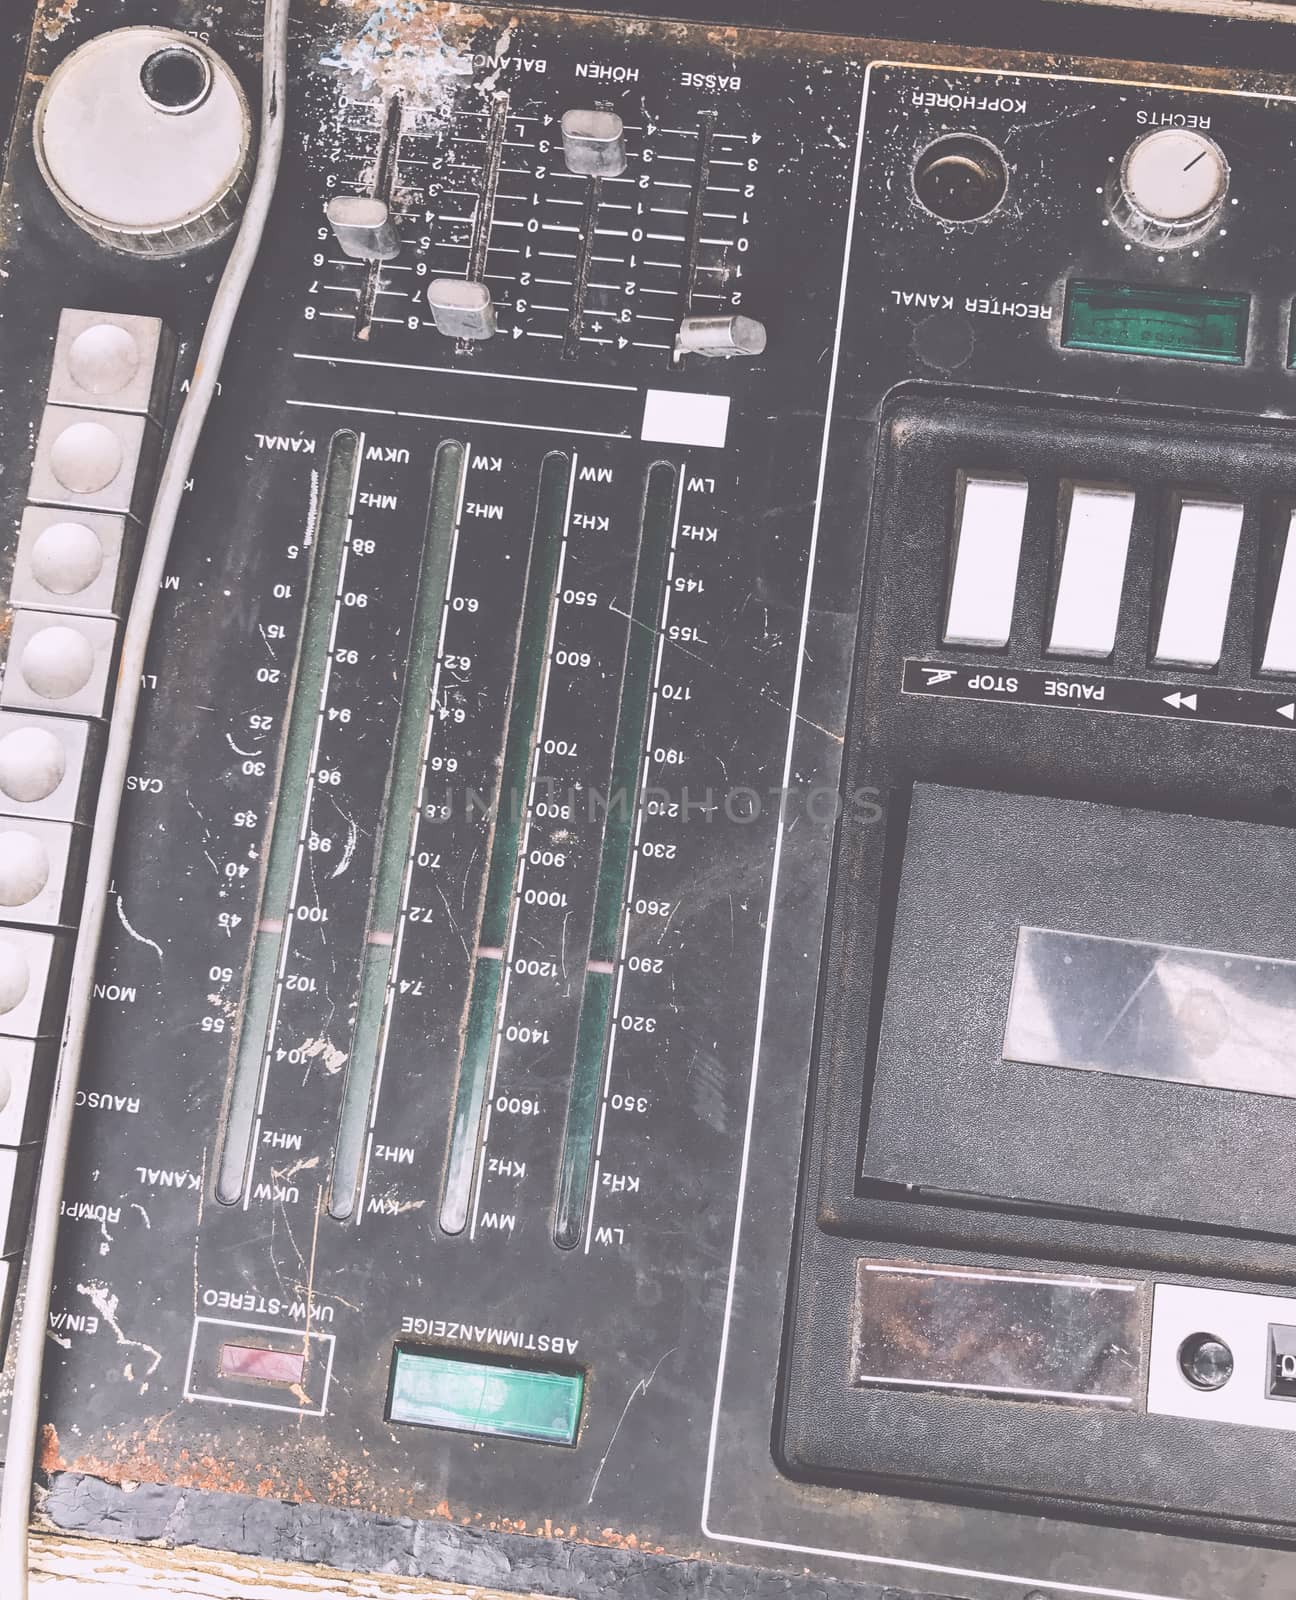 Old unnecessary faulty musical equipment mixer controller DJ control by Softulka